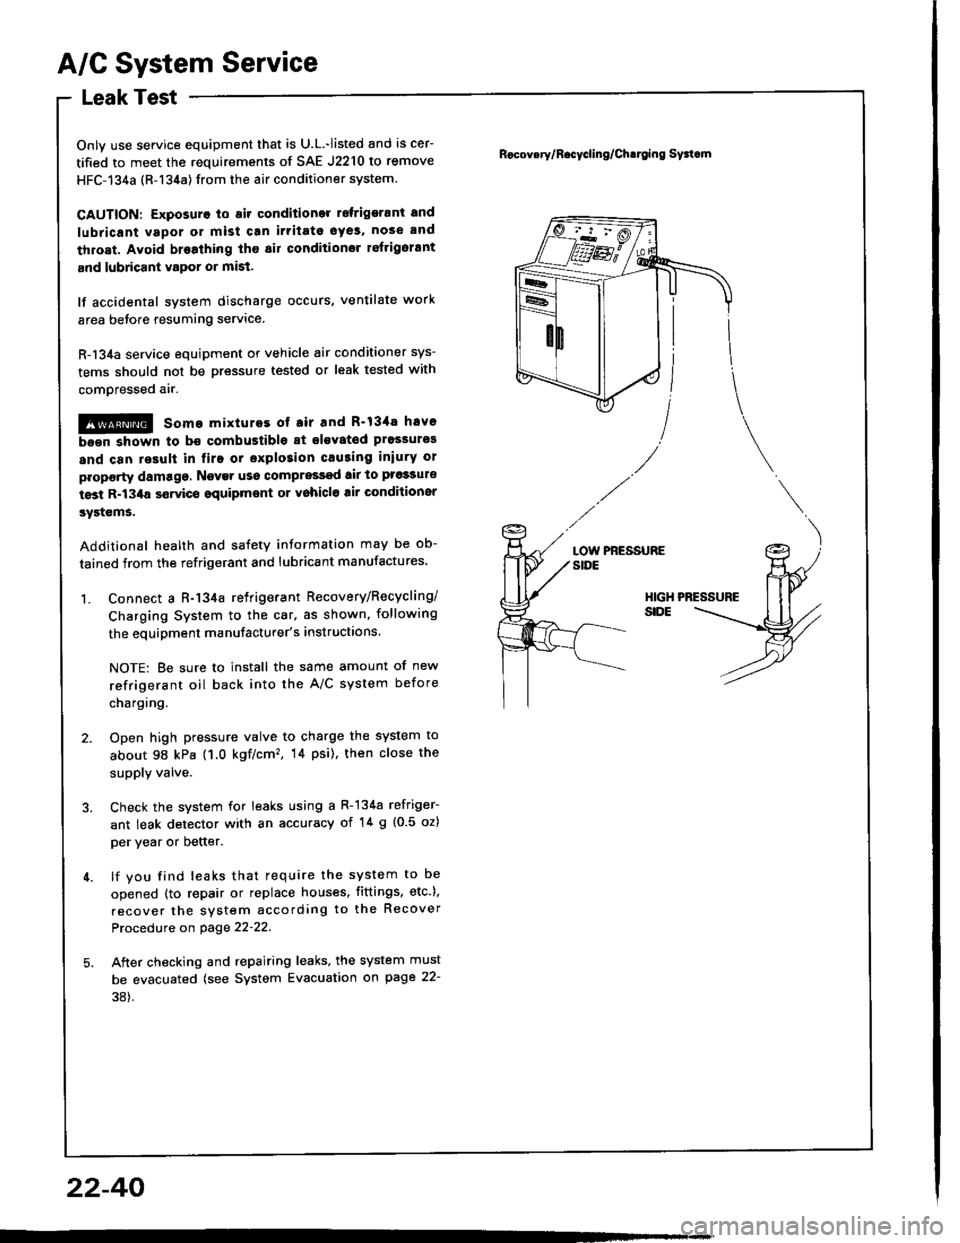 HONDA INTEGRA 1994 4.G Workshop Manual A/C System Service
Leak Test
Only use service equipment that is U.L.-listed and is cer-
tified to meet the requirements of SAE J2210 to remove
HFC-134a (R-134a) from the air conditioner system.
CAUTIO